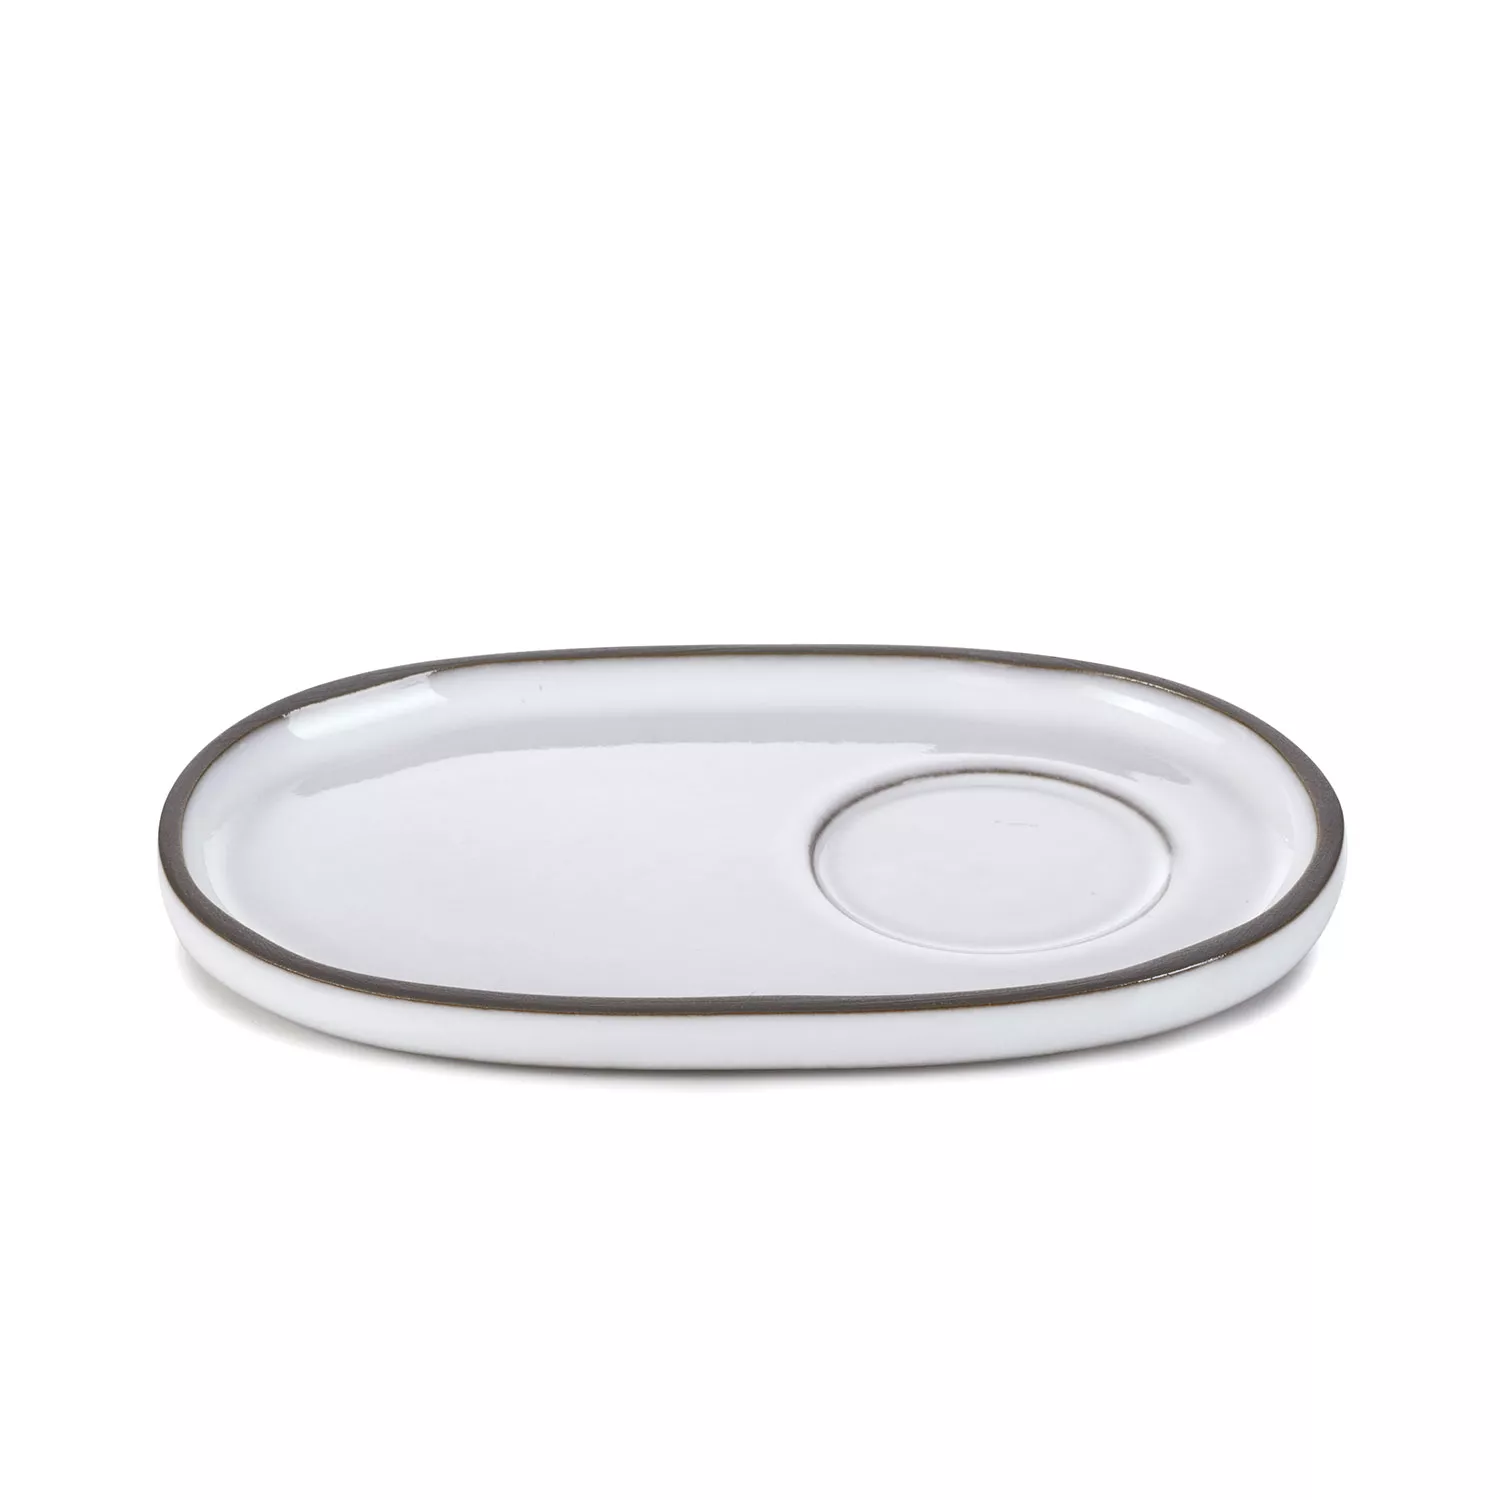 Revol Caract&#232;re Oval Saucers, Set of 4